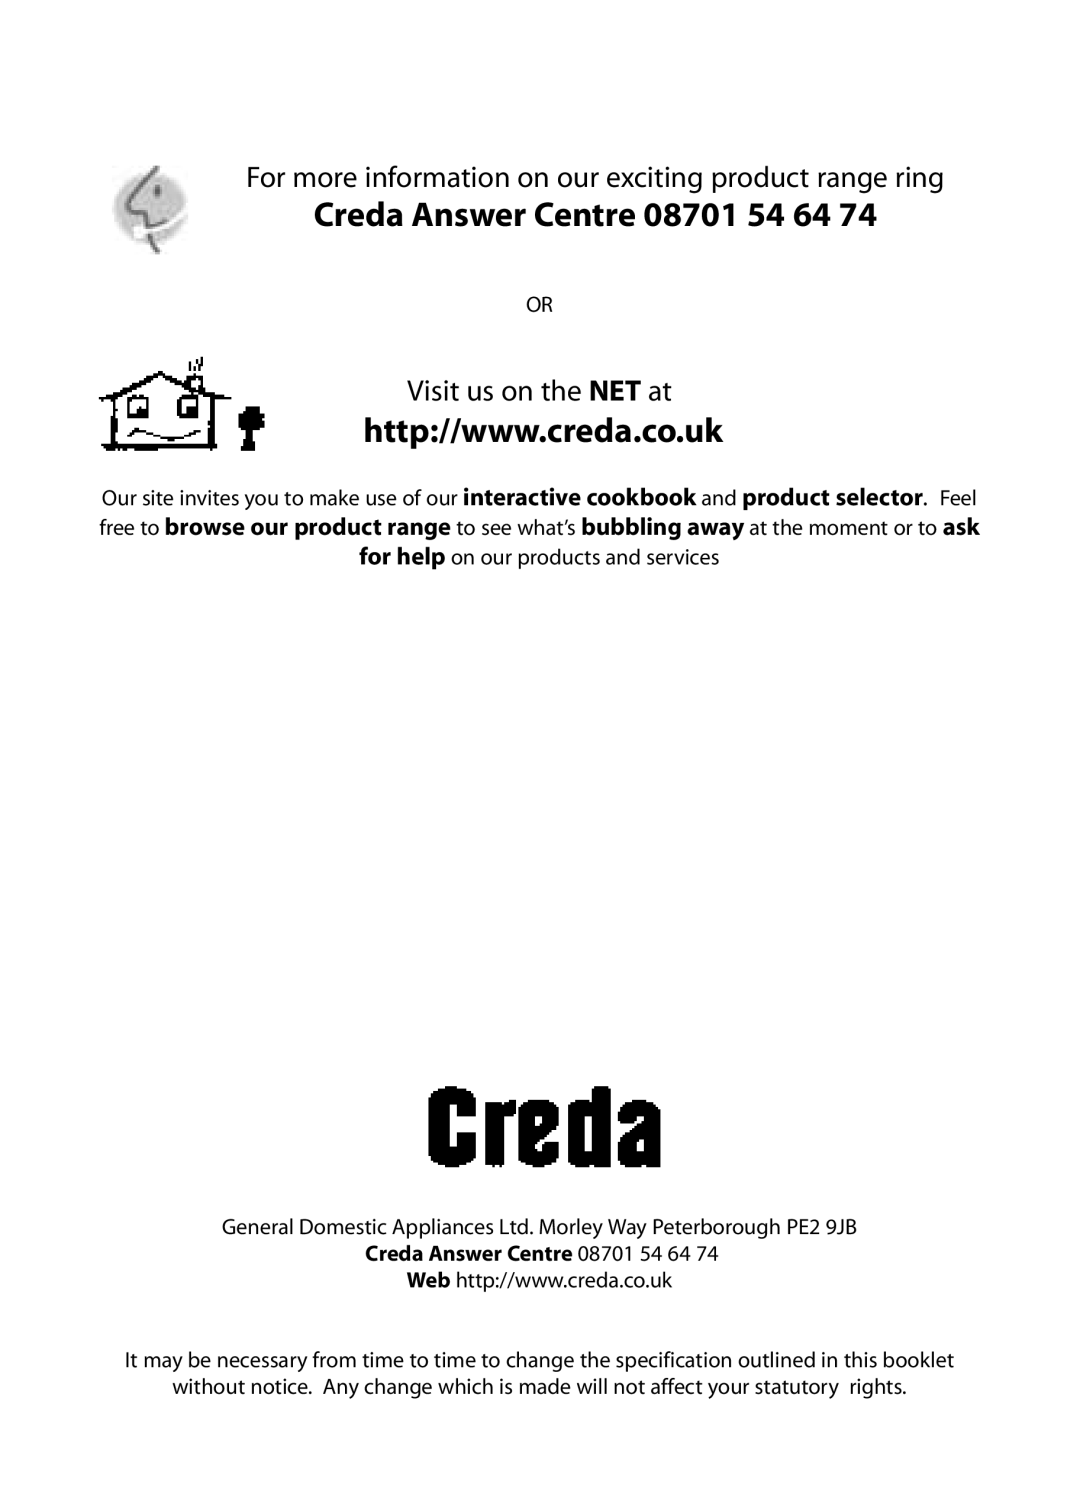 Creda CB01E manual Creda Answer Centre, For more information on our exciting product range ring, Visit us on the NET at 